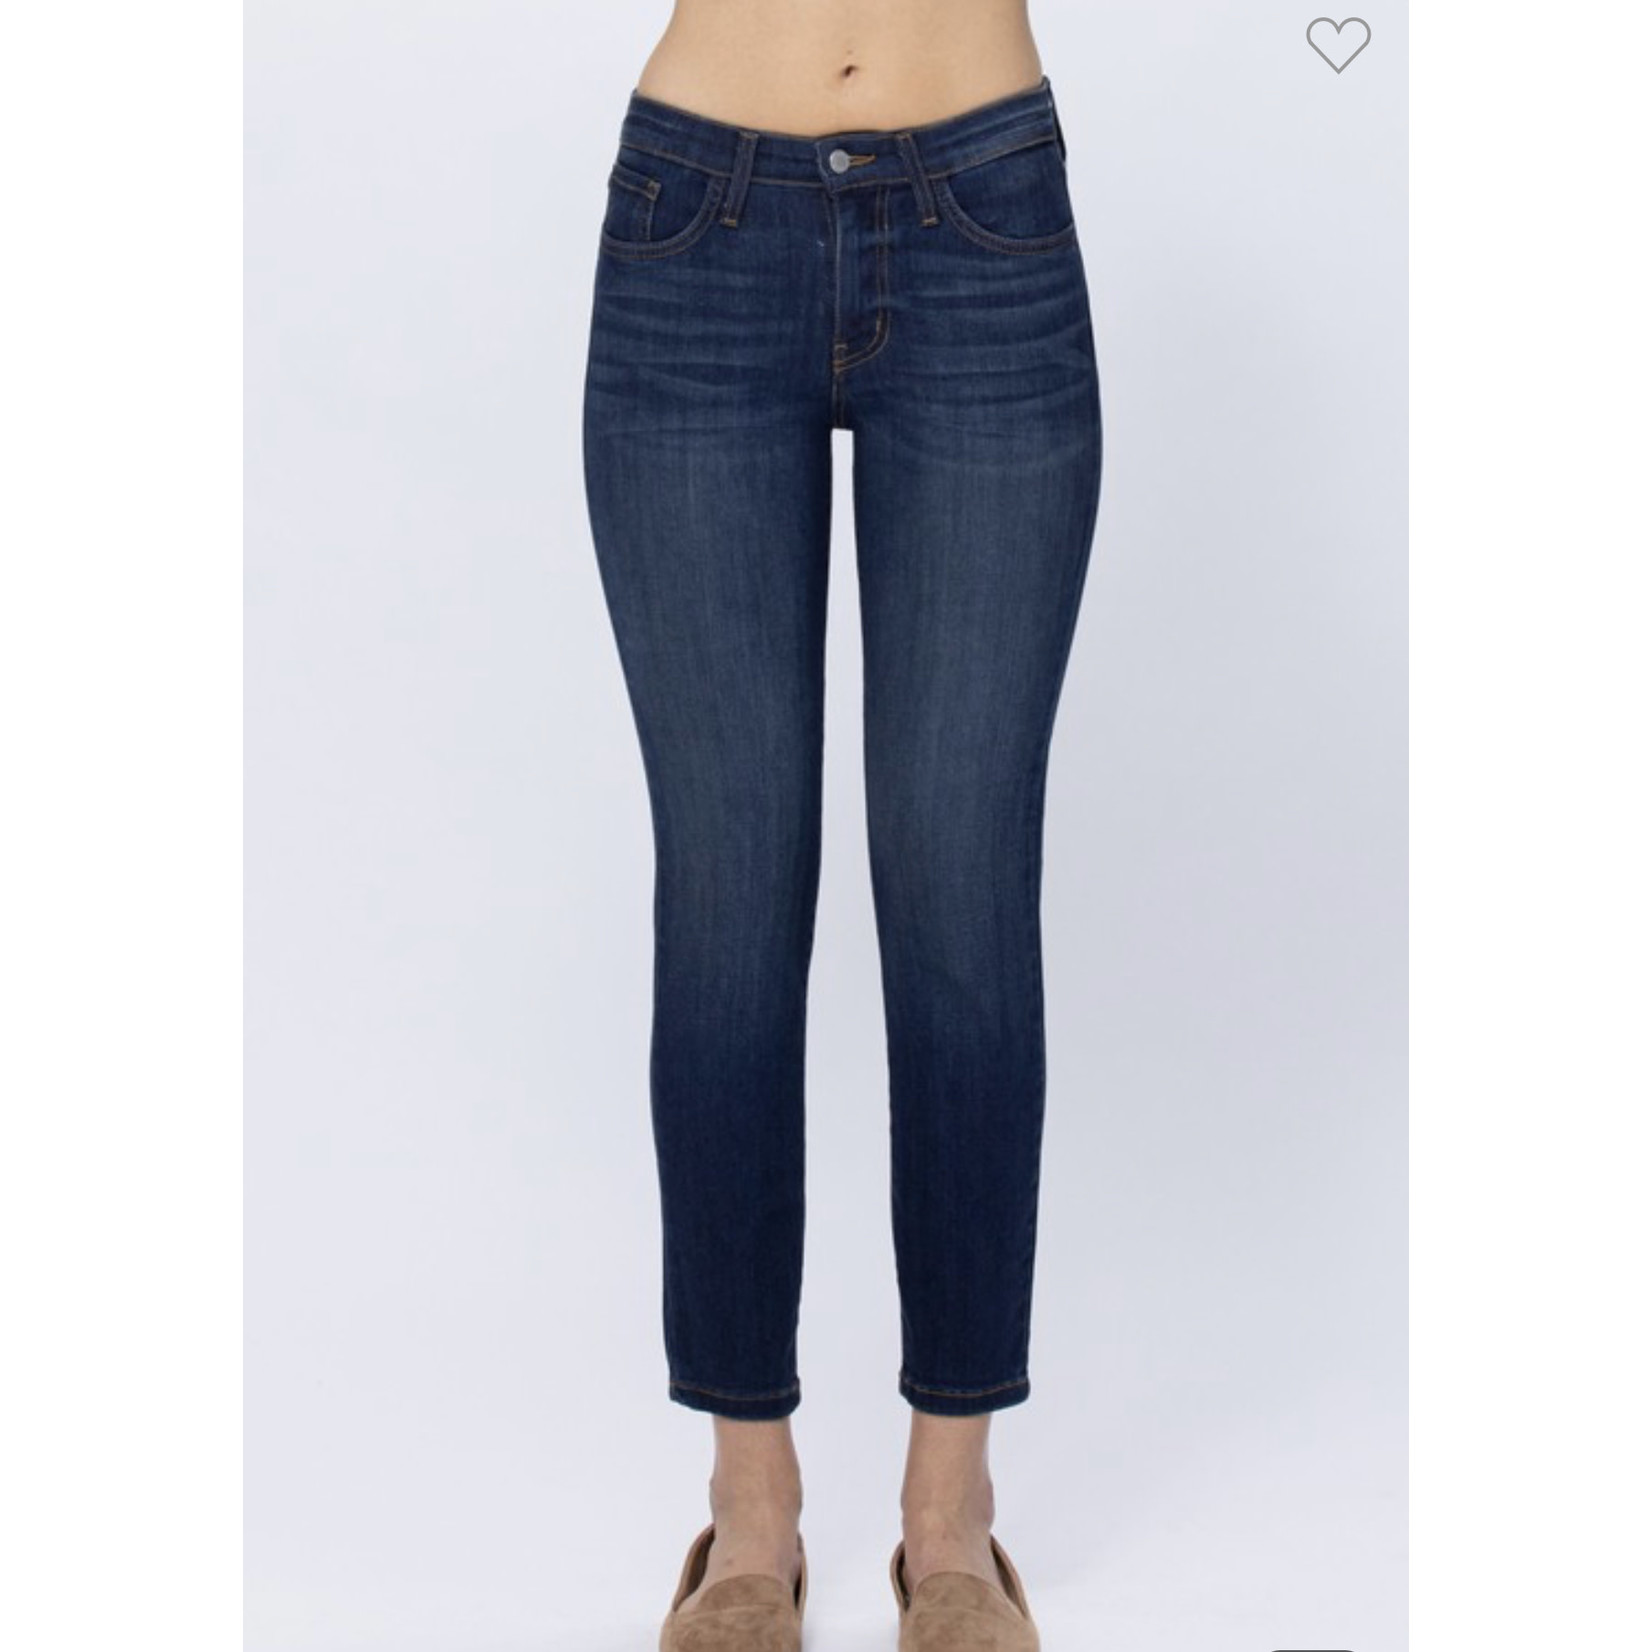 FashionGo / Judy Blue Handsand Relaxed Fit Judy Blue Jeans